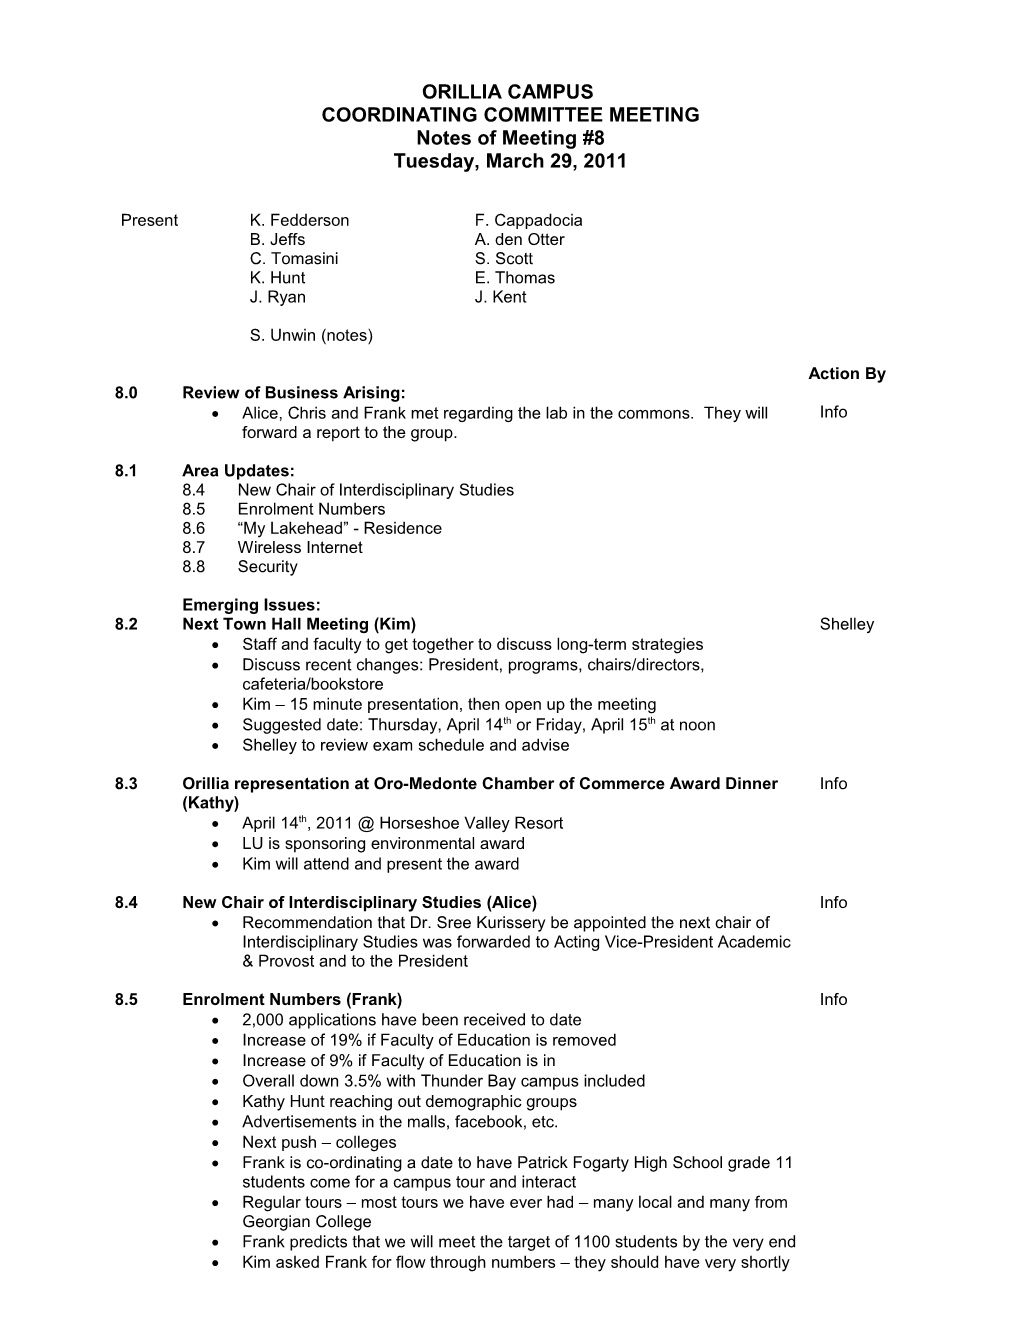 Orillia Campus Coordinating Committee Page 1 of 2